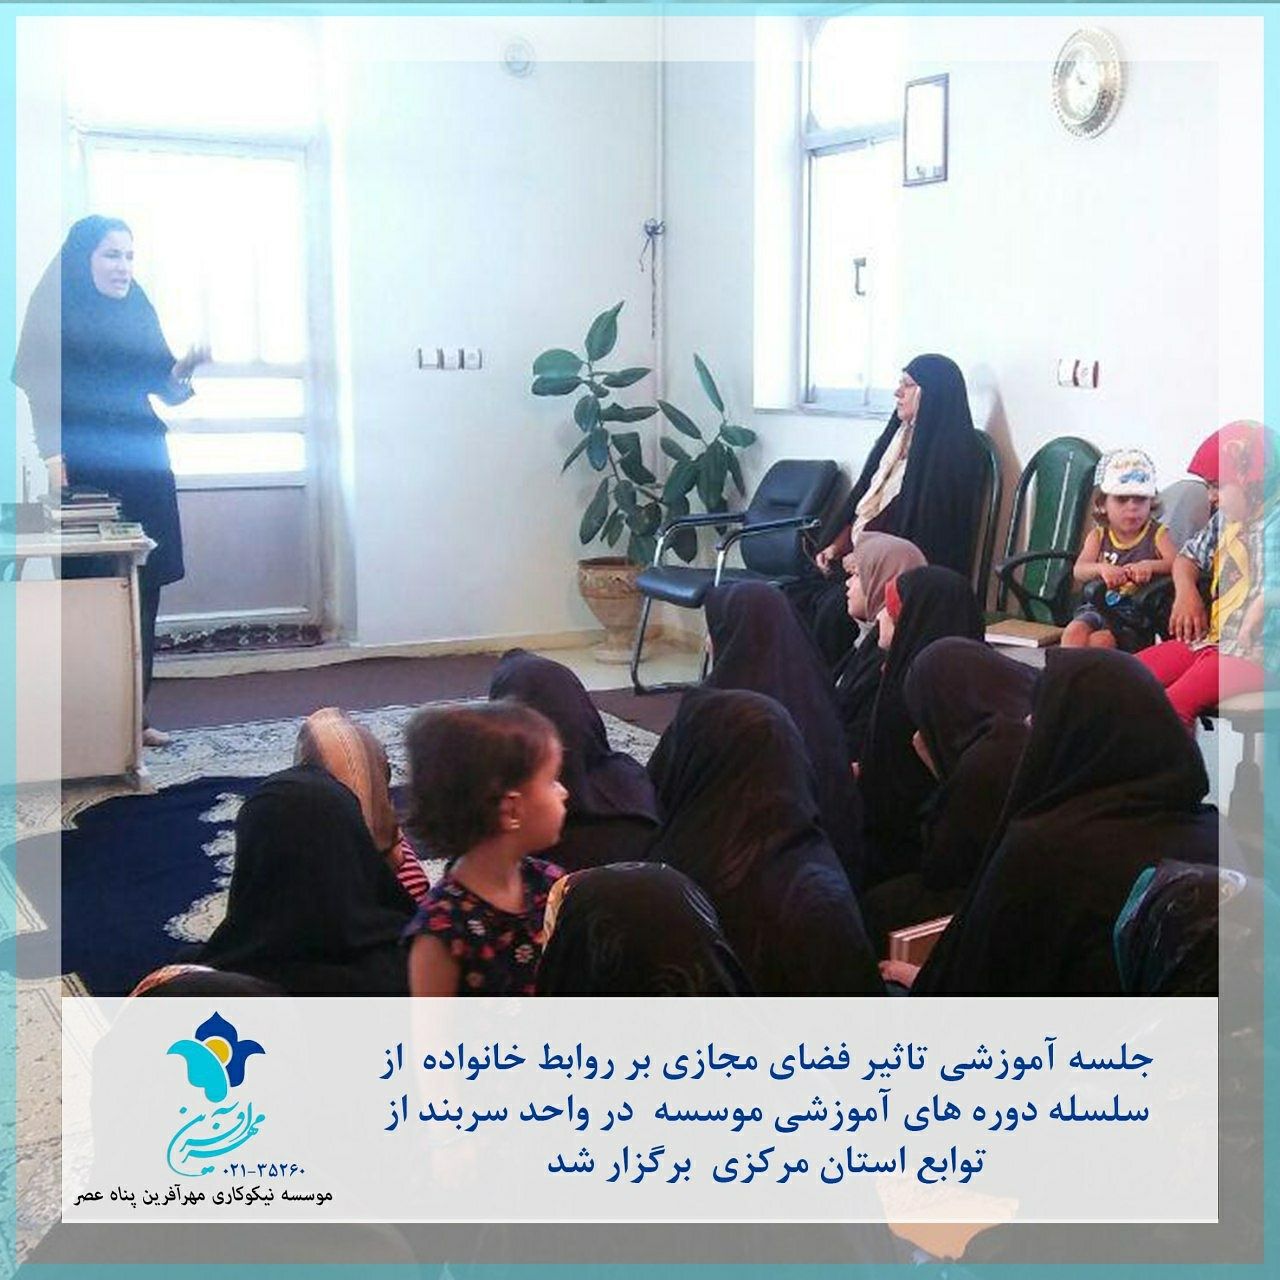 Educational course about effect of social media on family member’s relationships was held in Sarband branch of Mehrafarin in Markazi province